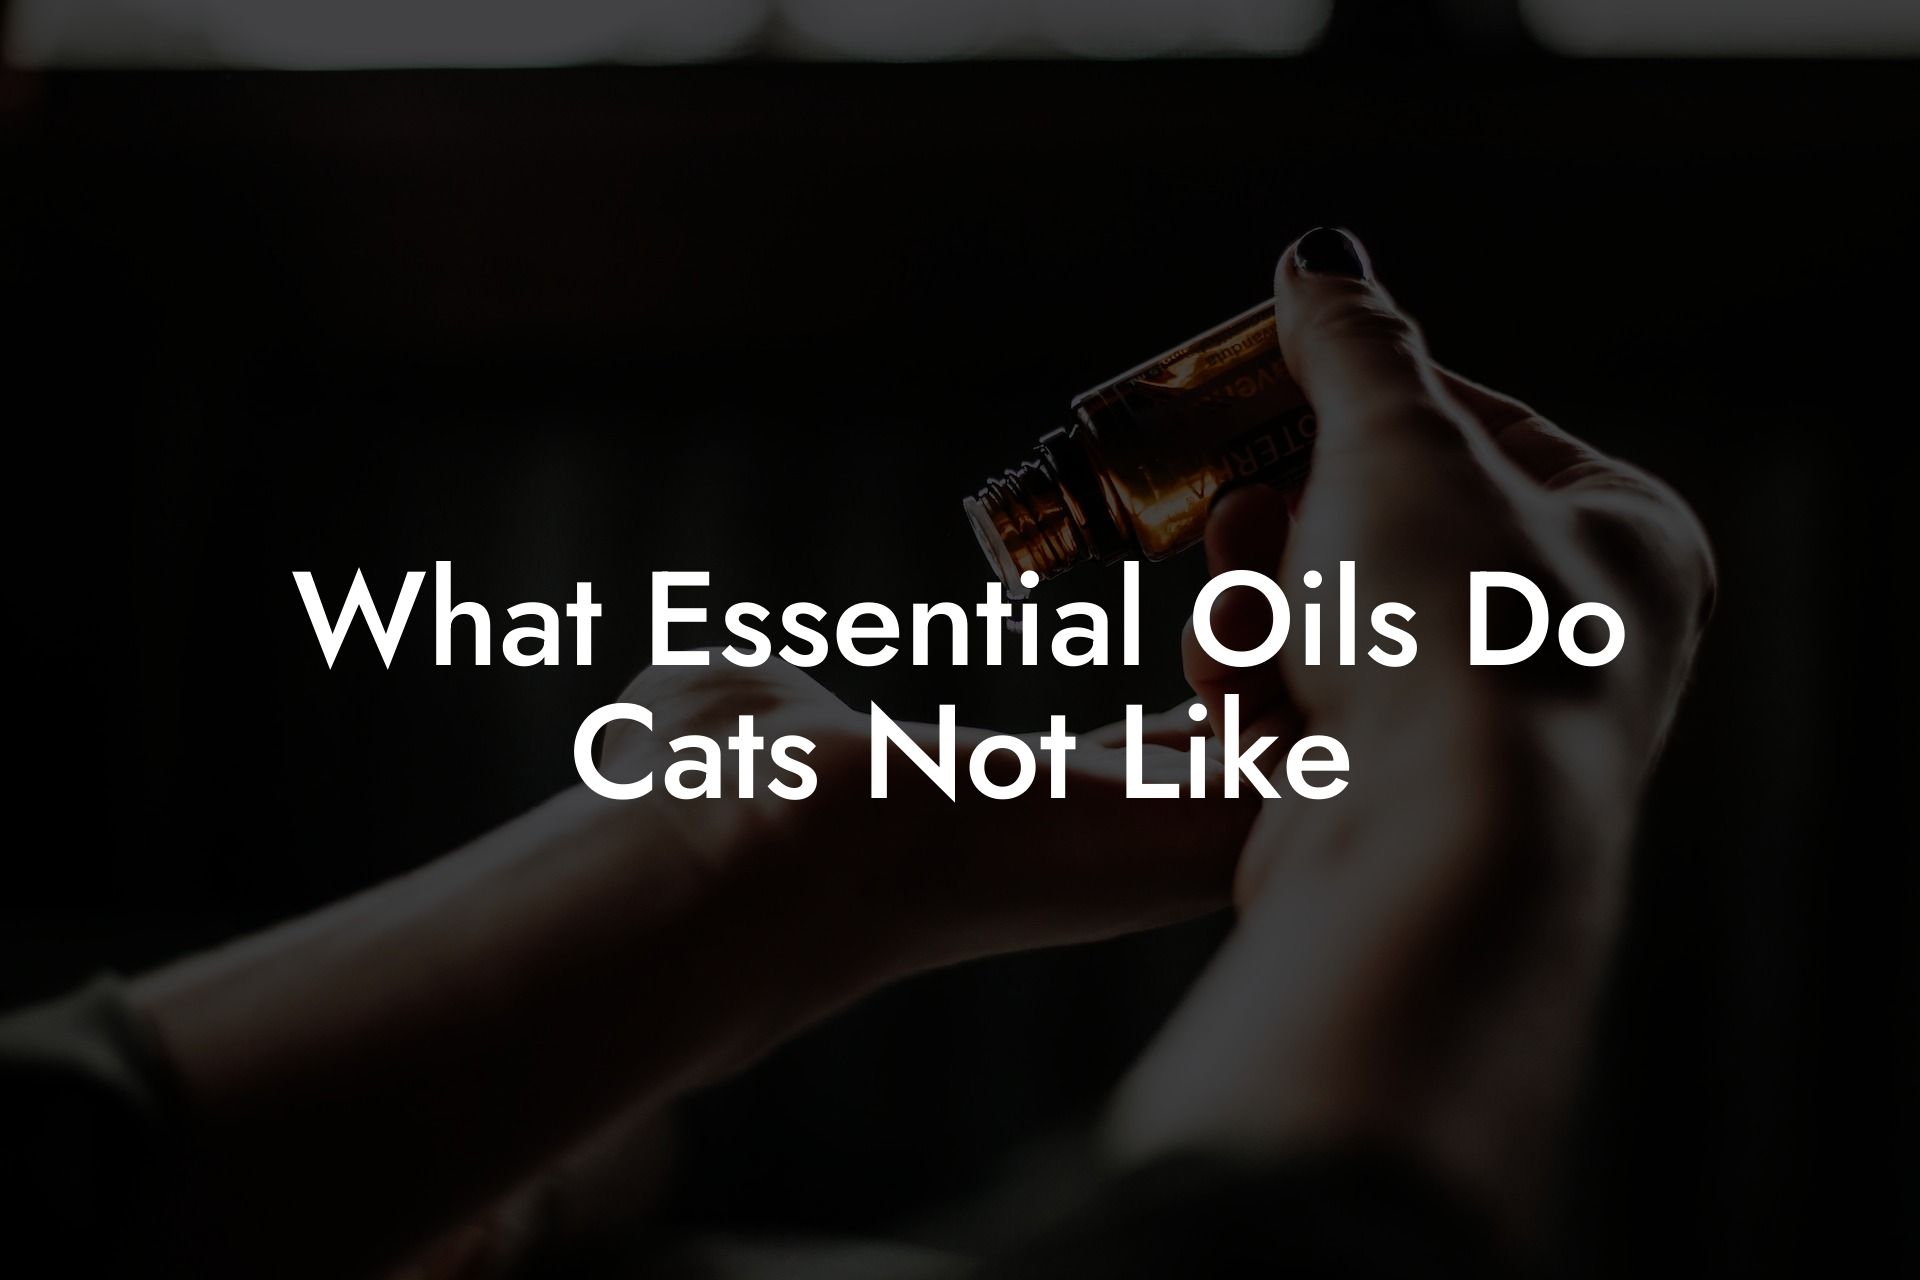 What Essential Oils Do Cats Not Like